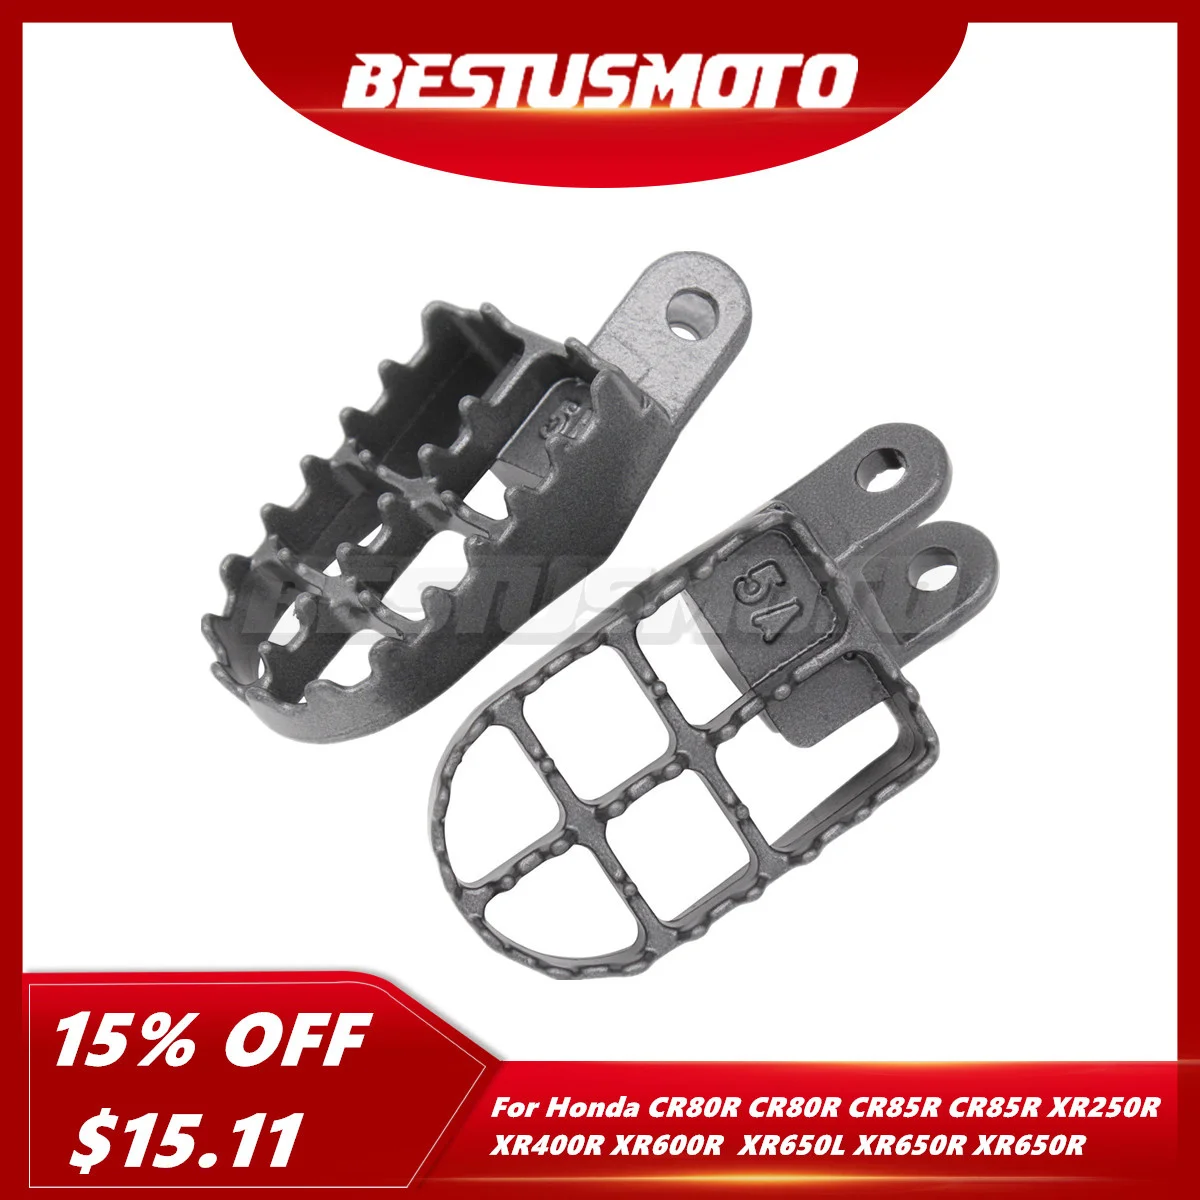 

Motocross Foot Pegs Footpeg Footrests For Honda CR80 CR85 CR80R CR85R XR250 XR250R XR400 XR400R XR600 XR600R XR650R XR650 XR650L